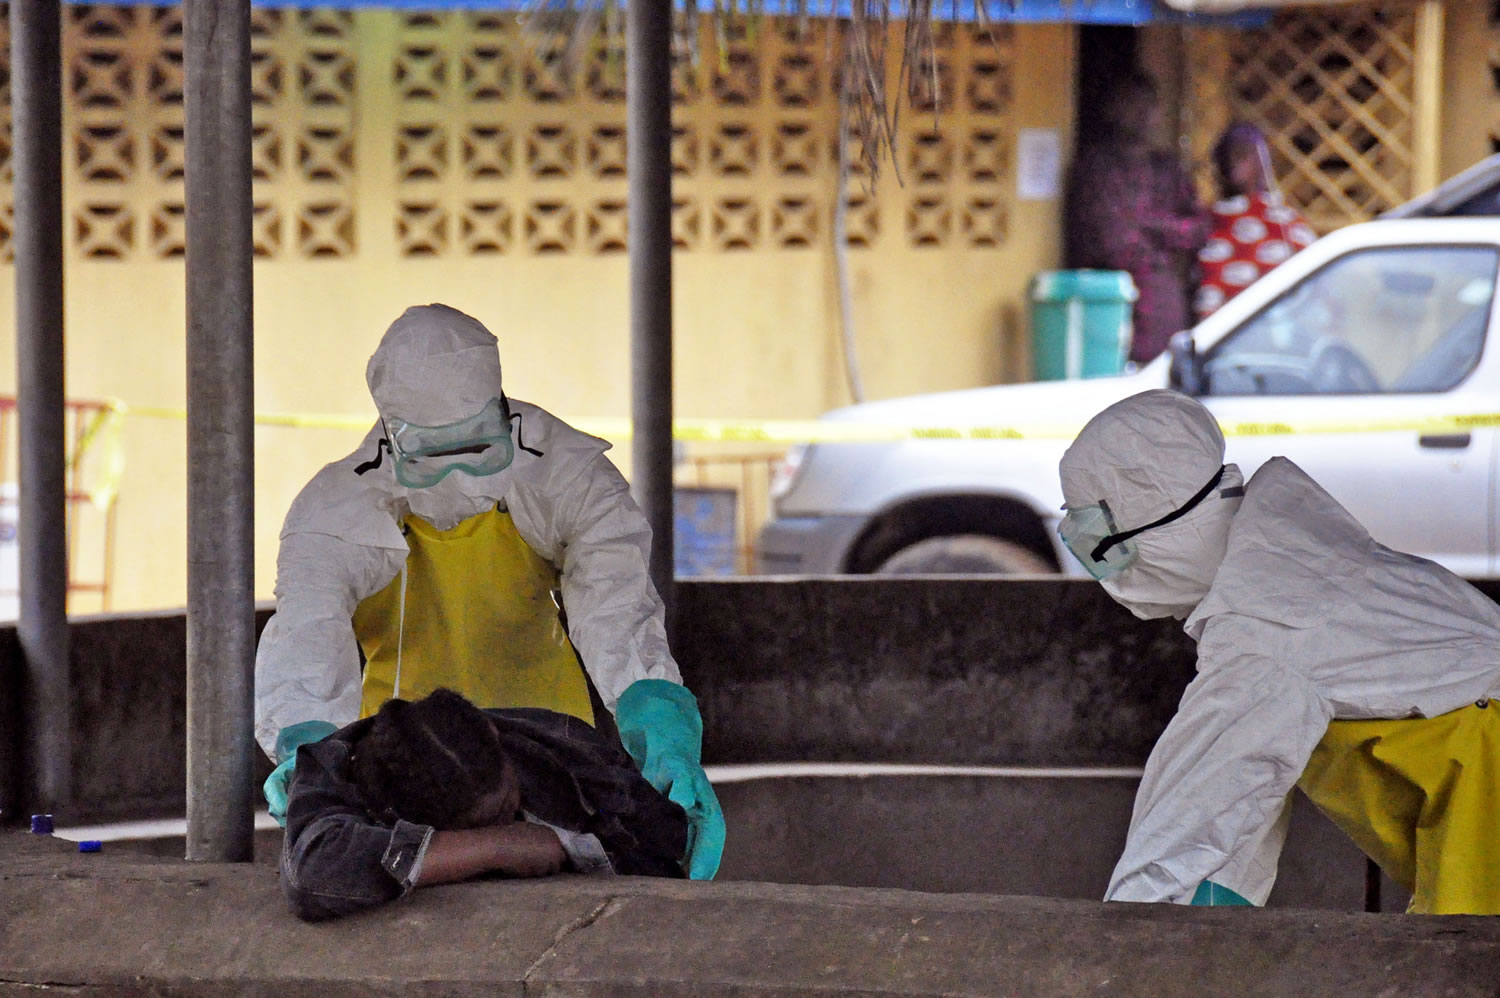 Health workers move the body of a fellow health worker who was found dead in a seat, and who they believe passed away from the Ebola virus, at one of the largest hospitals in the city of Monrovia, Liberia, on Saturday.